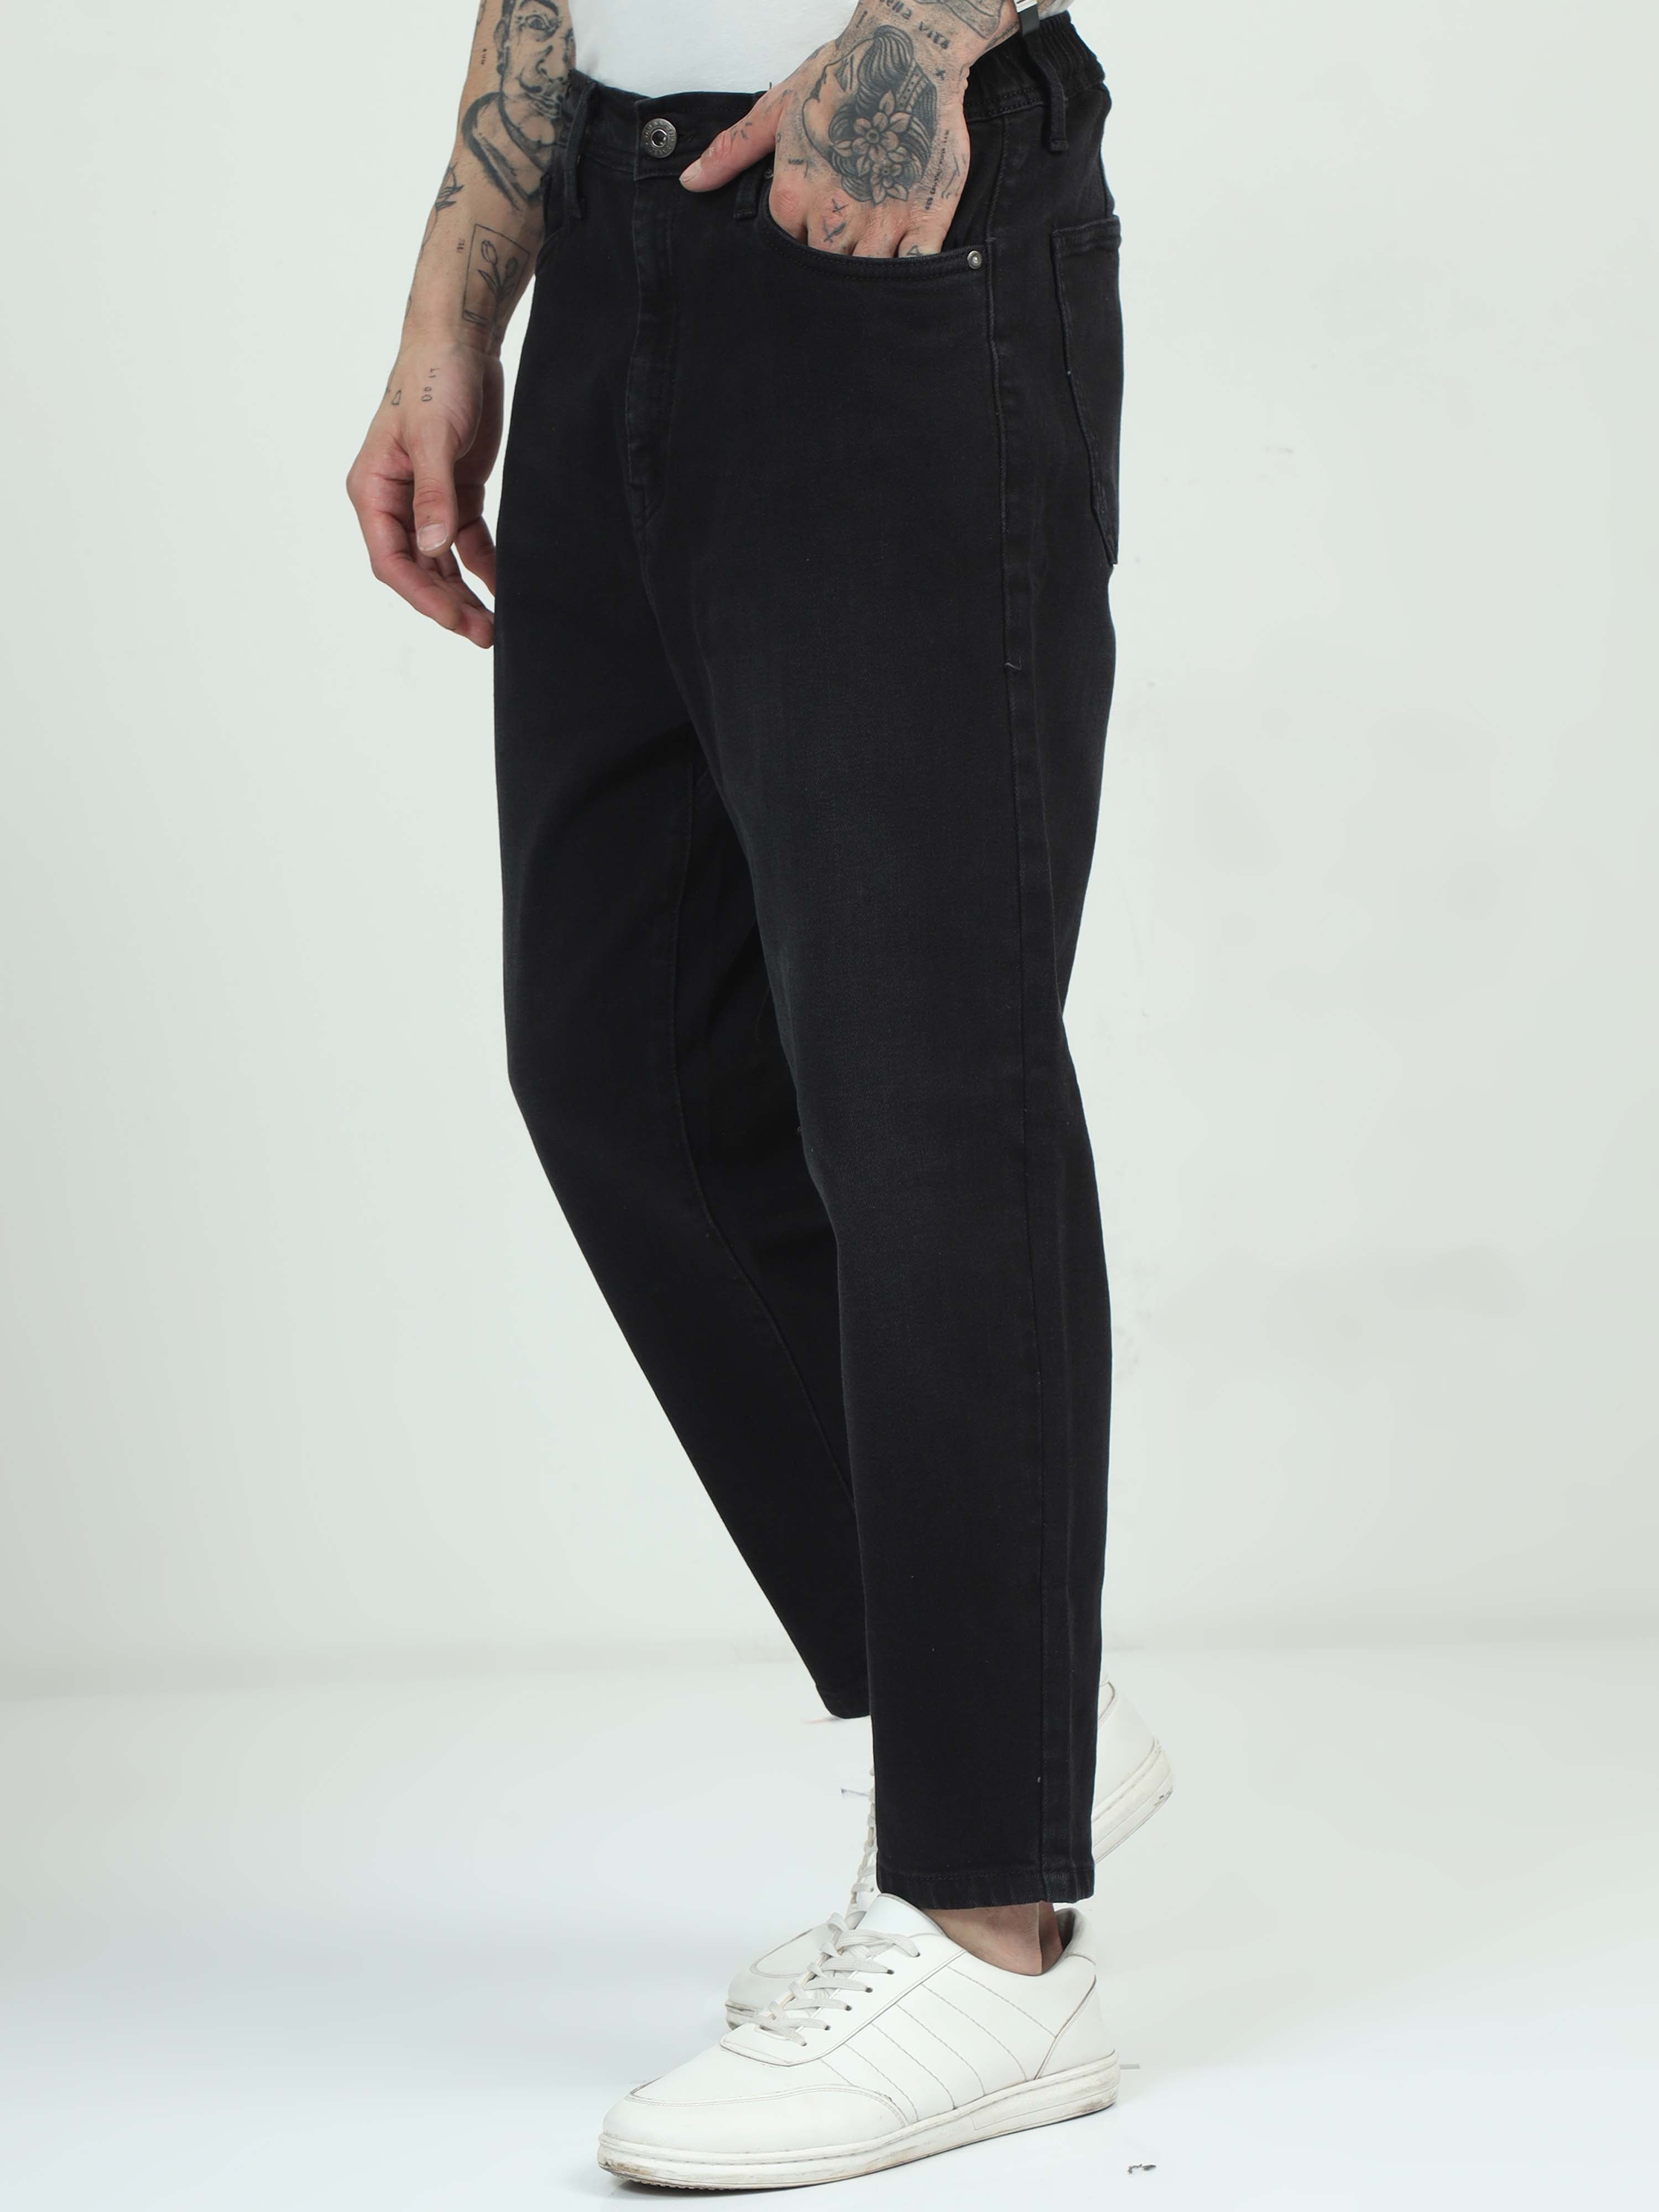 Jetblack Slouchy Fit Jeans